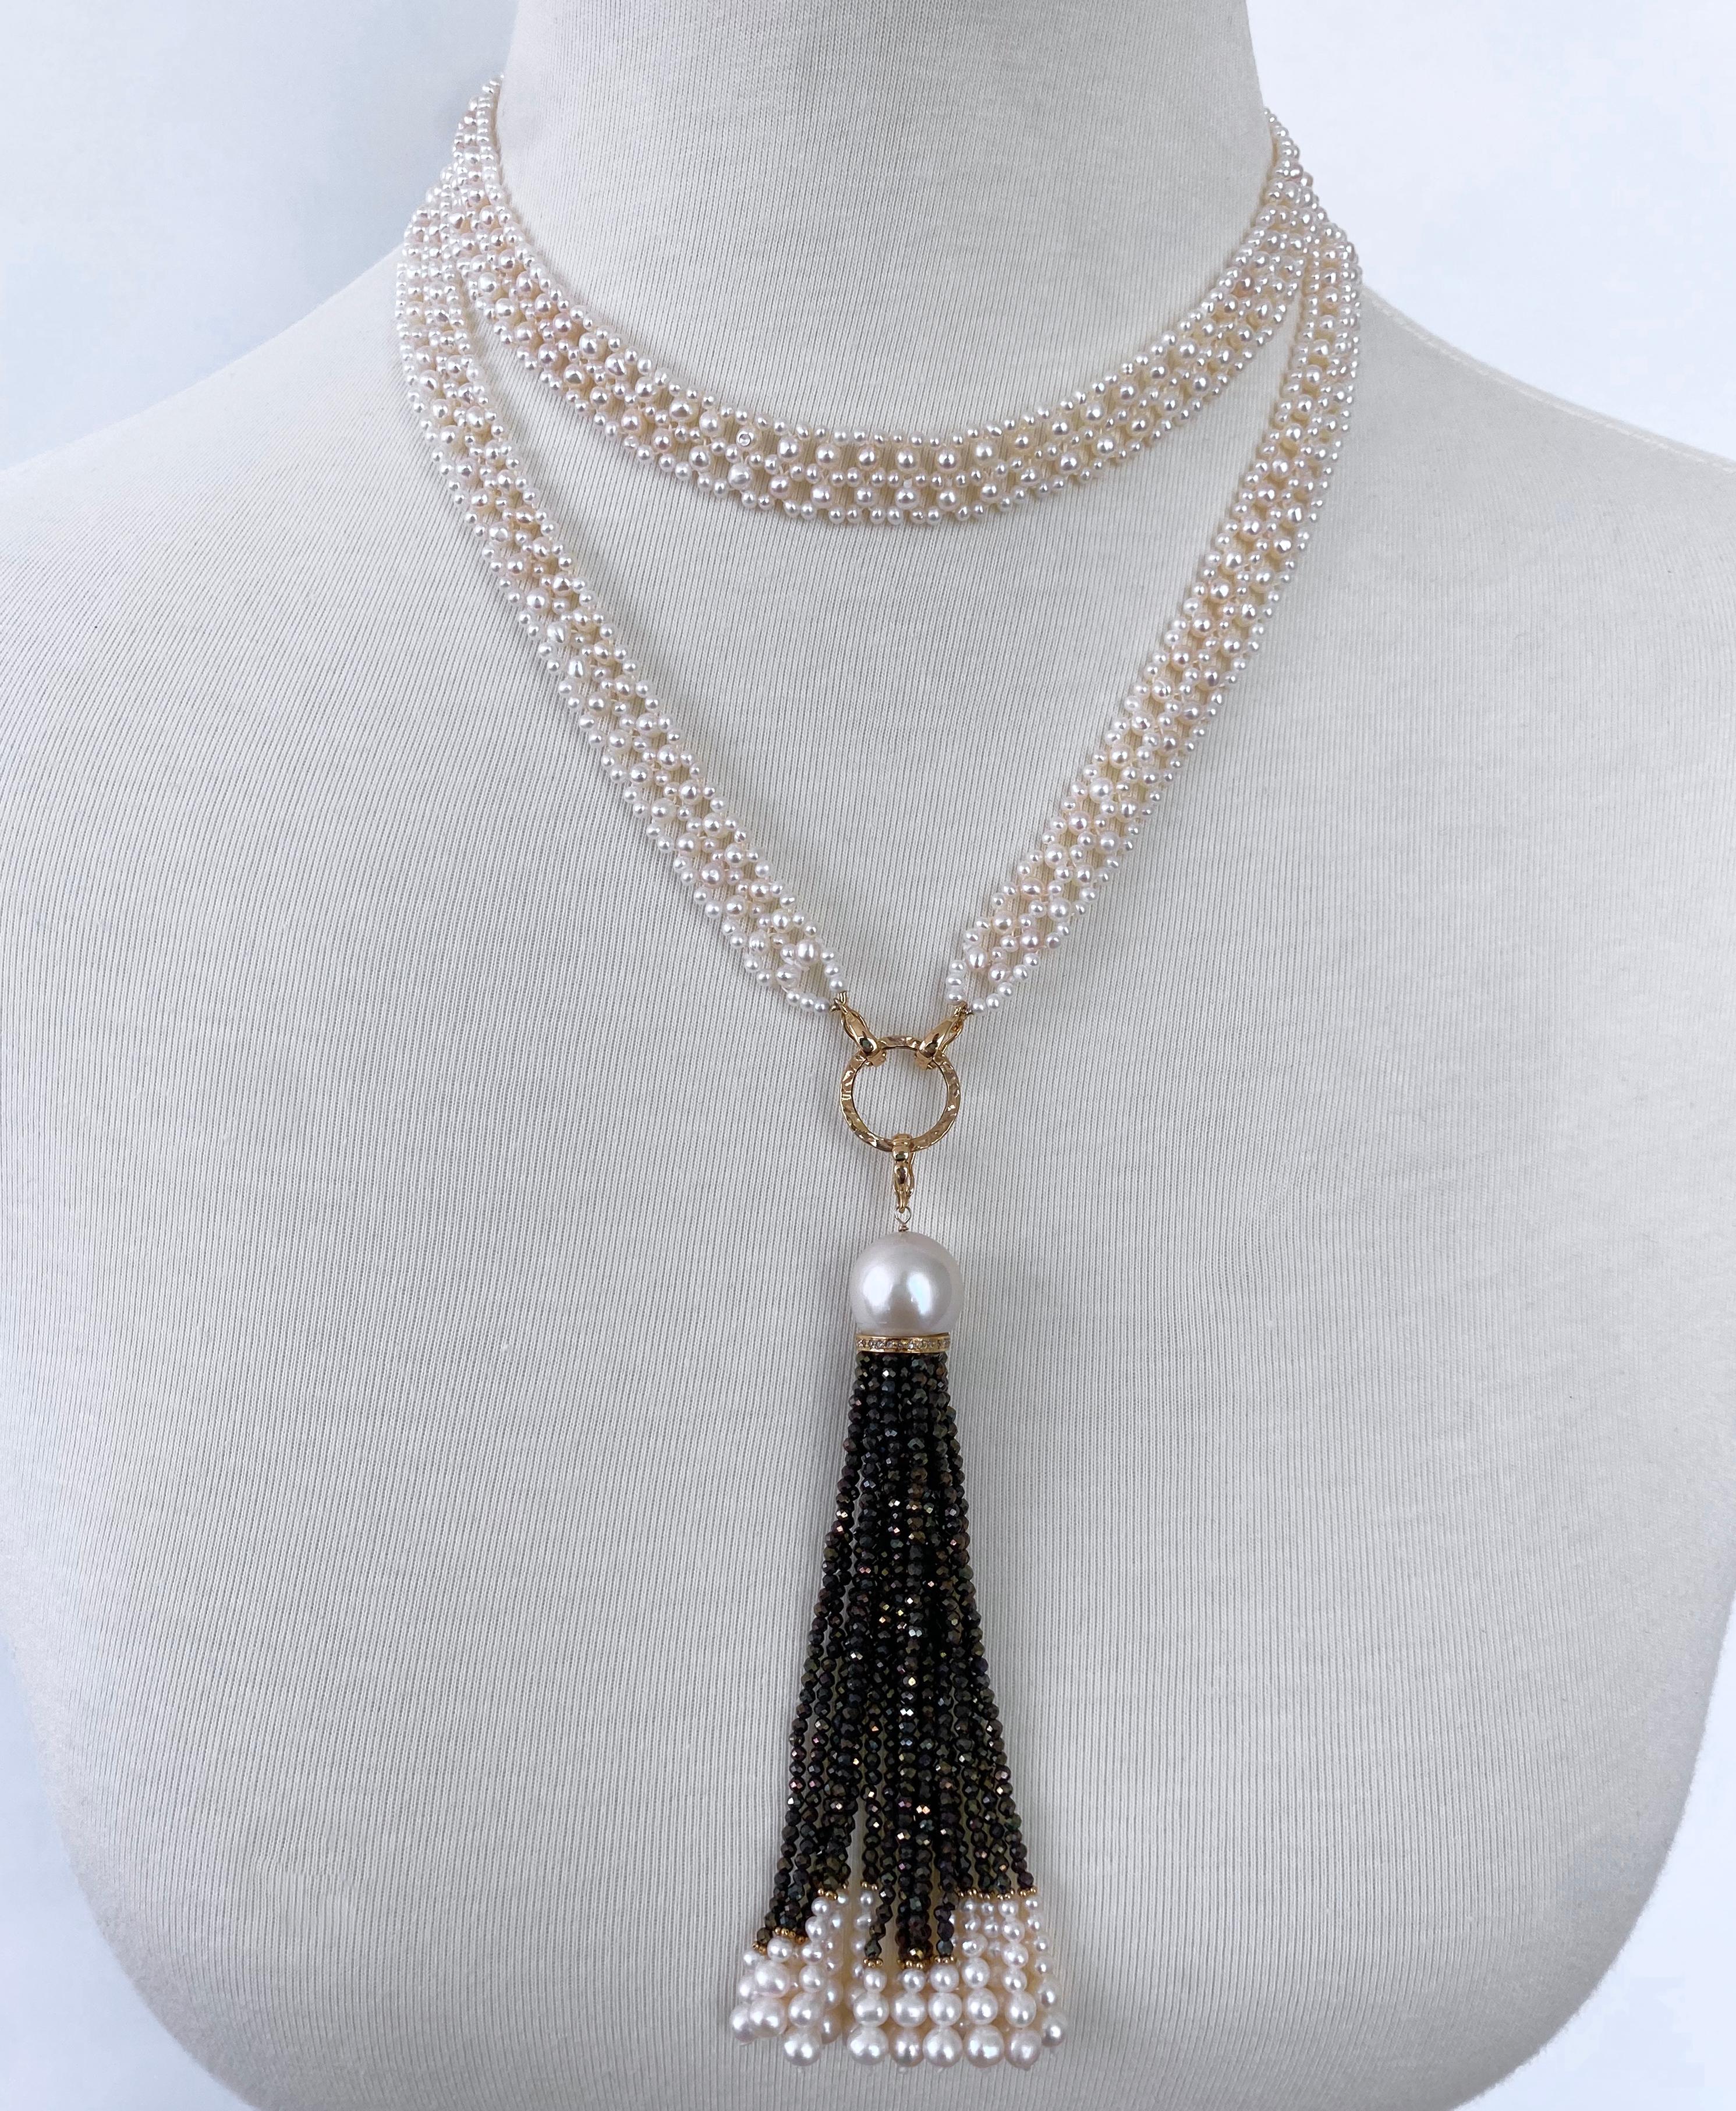 Classic Sautoir by Marina J. 
This piece is made using all Seed Pearls intricately woven together into a fine double column Lace like design. Measuring 35 inches long sans Tassel, both ends of this sautoir meet at solid 14k Yellow Gold Latches which